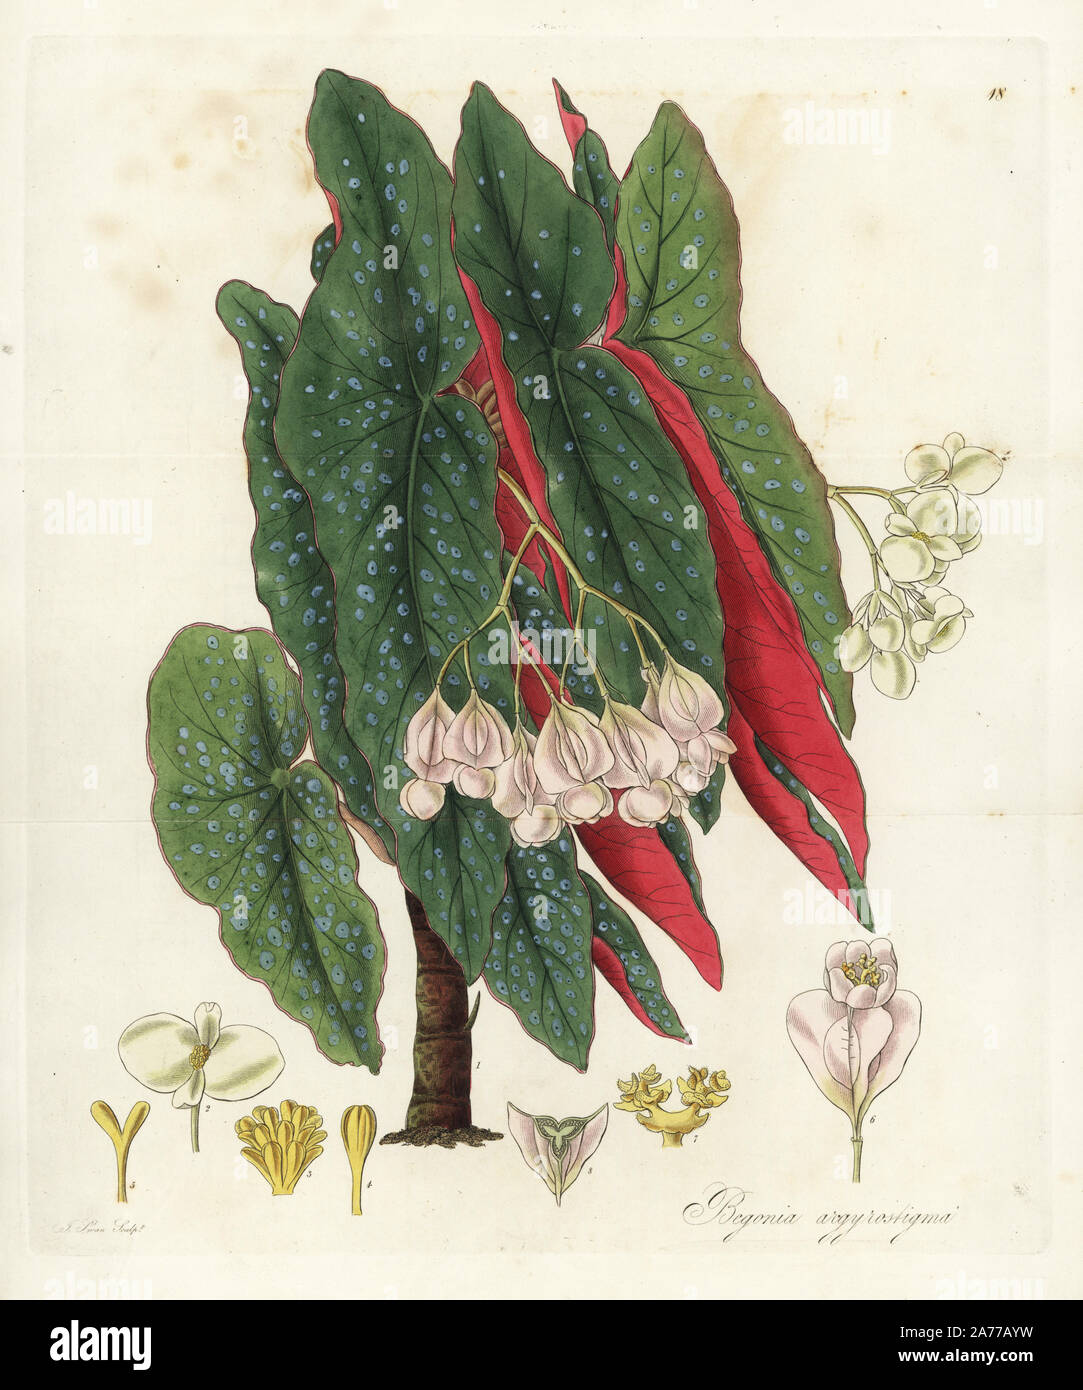 Polka dot begonia, Begonia maculata (Silver spotted begonia, Begonia argyrostigma). Handcoloured copperplate engraving by J. Swan after a botanical illustration by William Jackson Hooker from his own 'Exotic Flora,' Blackwood, Edinburgh, 1823. Hooker (1785-1865) was an English botanist who specialized in orchids and ferns, and was director of the Royal Botanical Gardens at Kew from 1841. Stock Photo